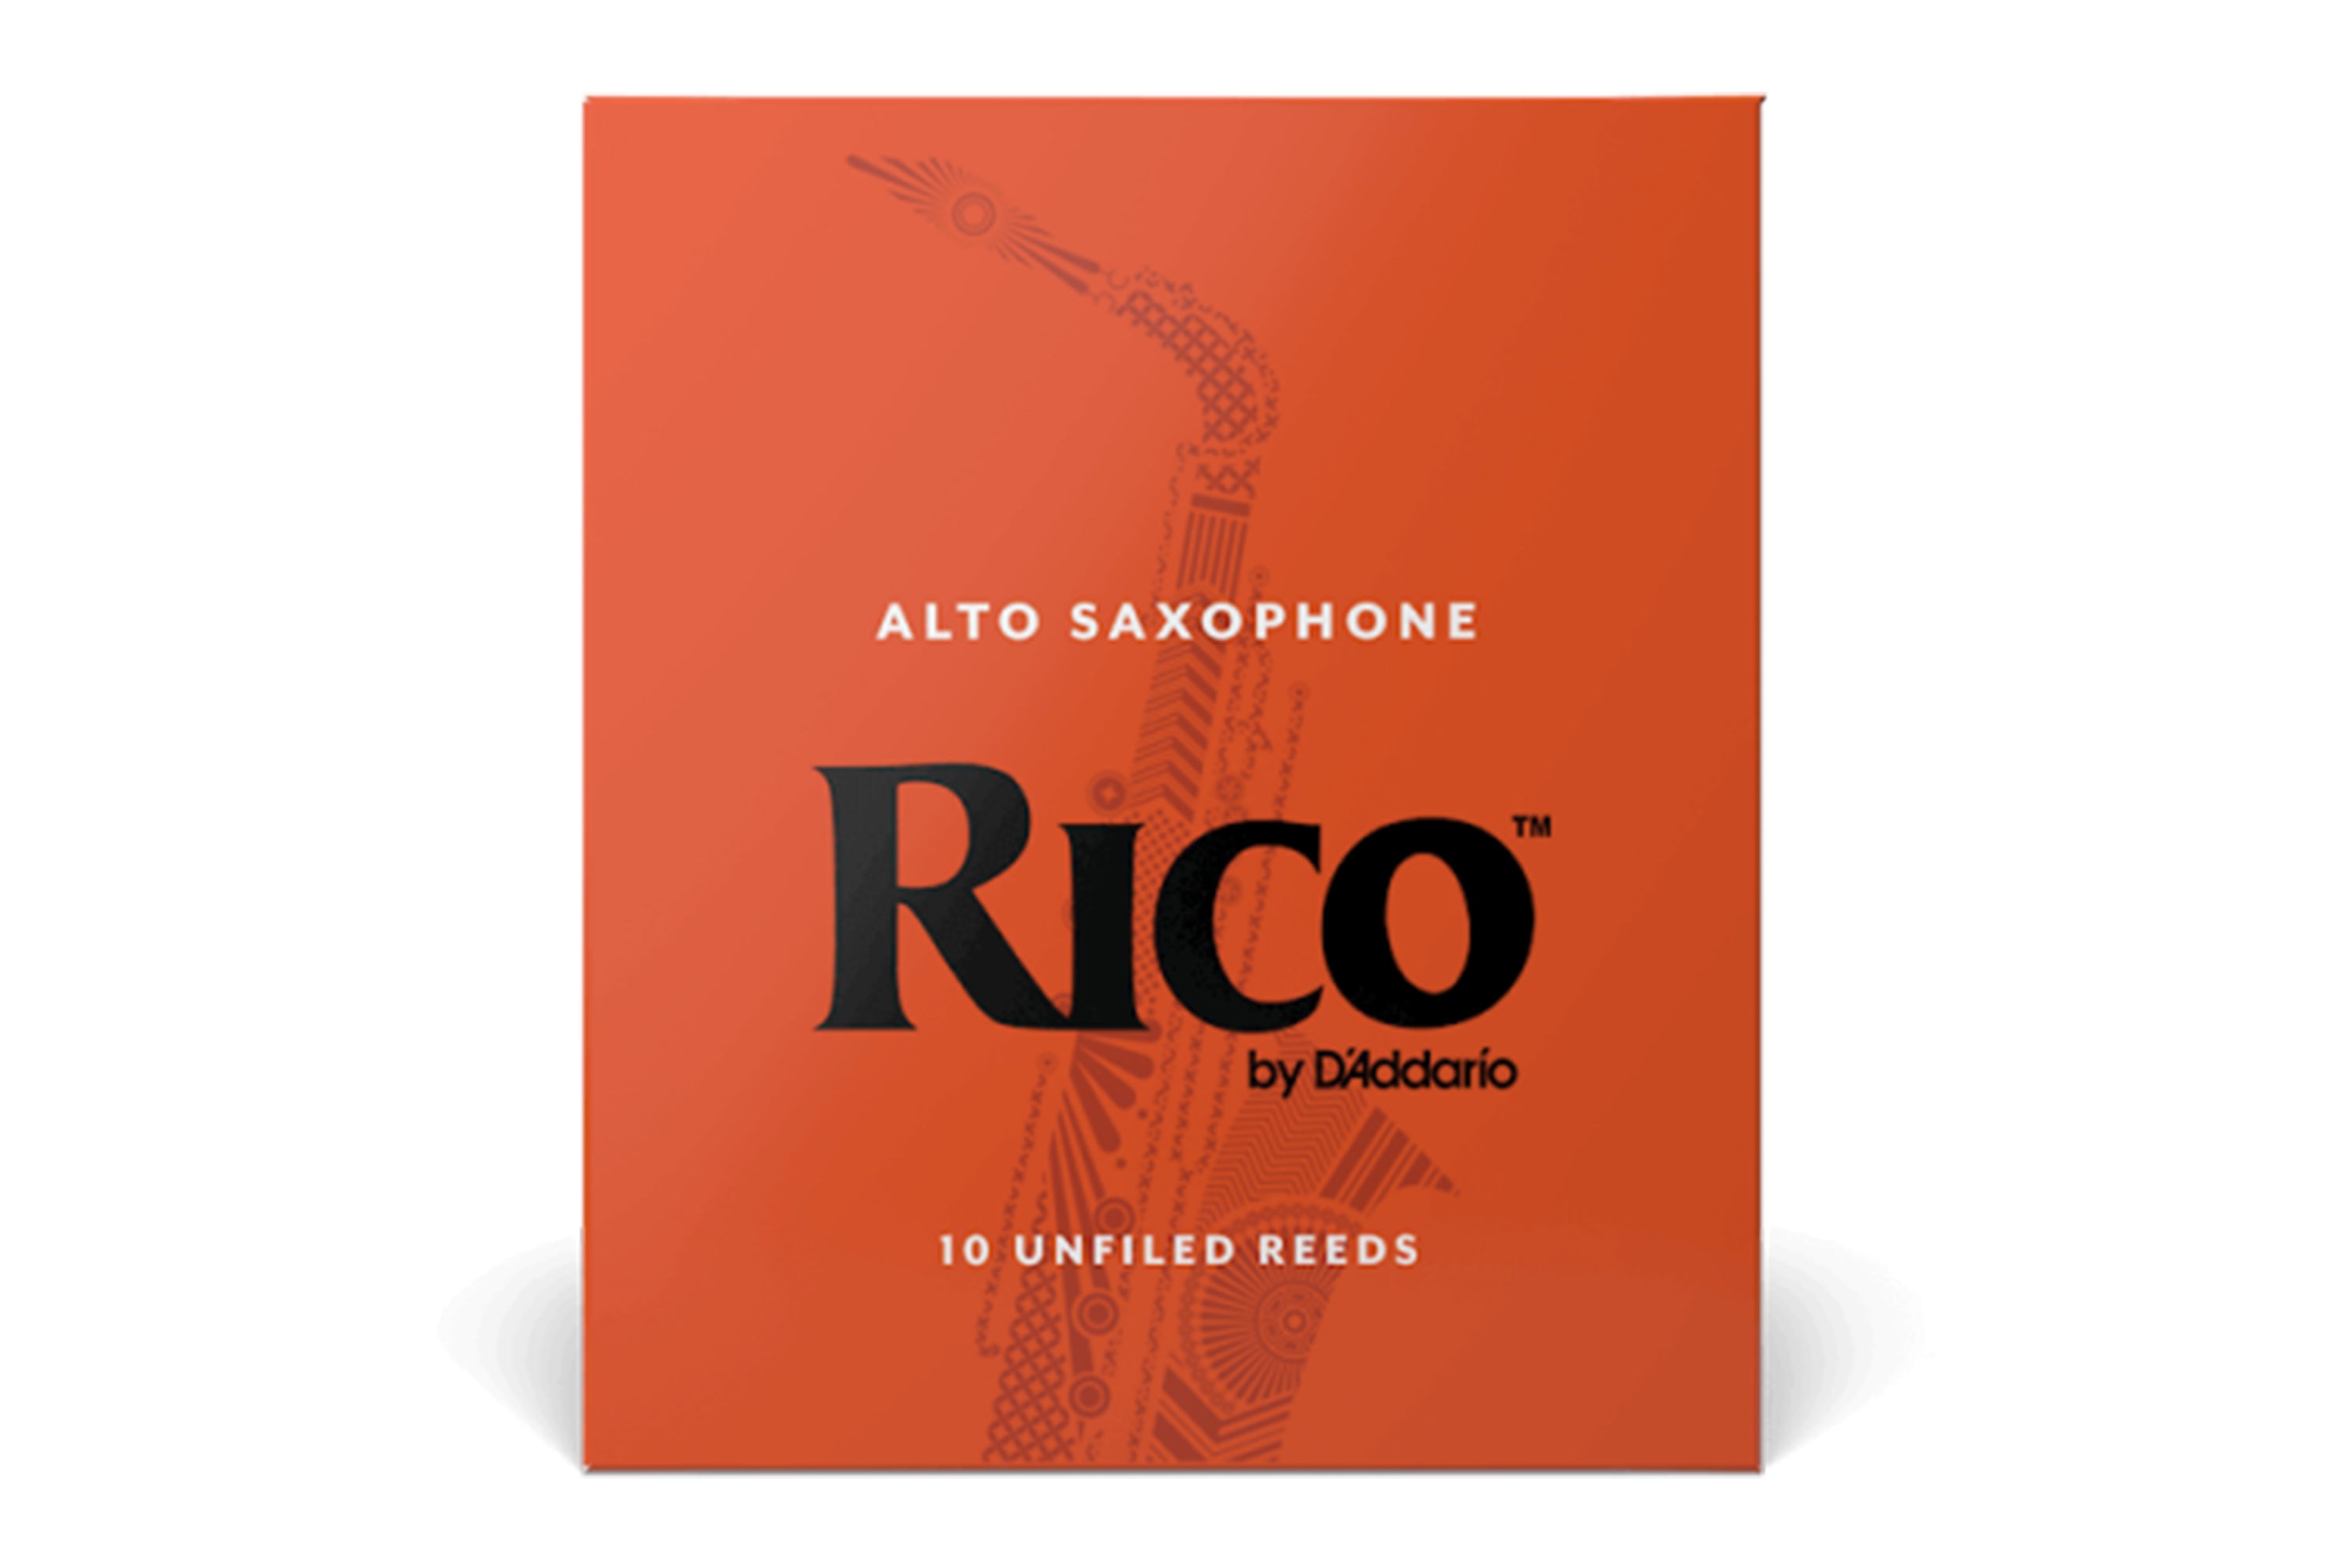 Rico by D'Addario Alto Saxophone Reeds Strength 3.0 - 10 Pack